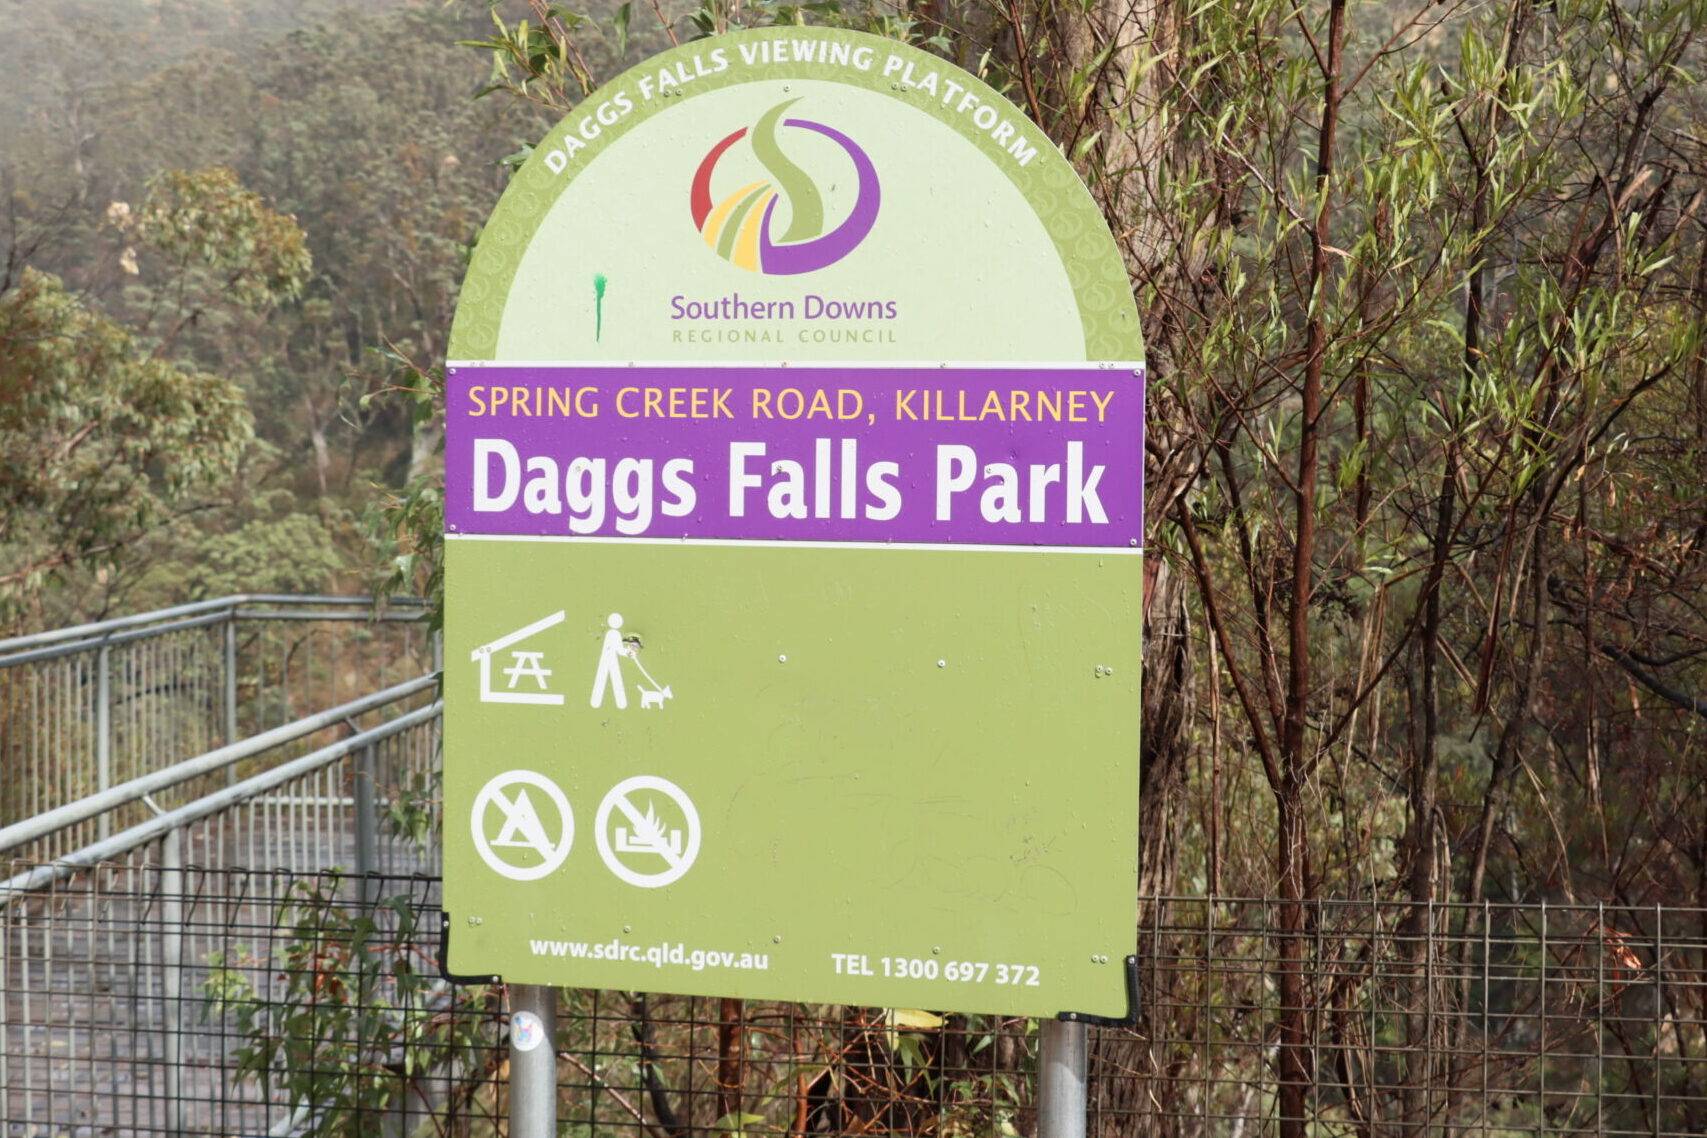 Daggs Falls just down the road from Queen Mary Falls five waterfalls surrounding Killarney make this area a popular scenic destination